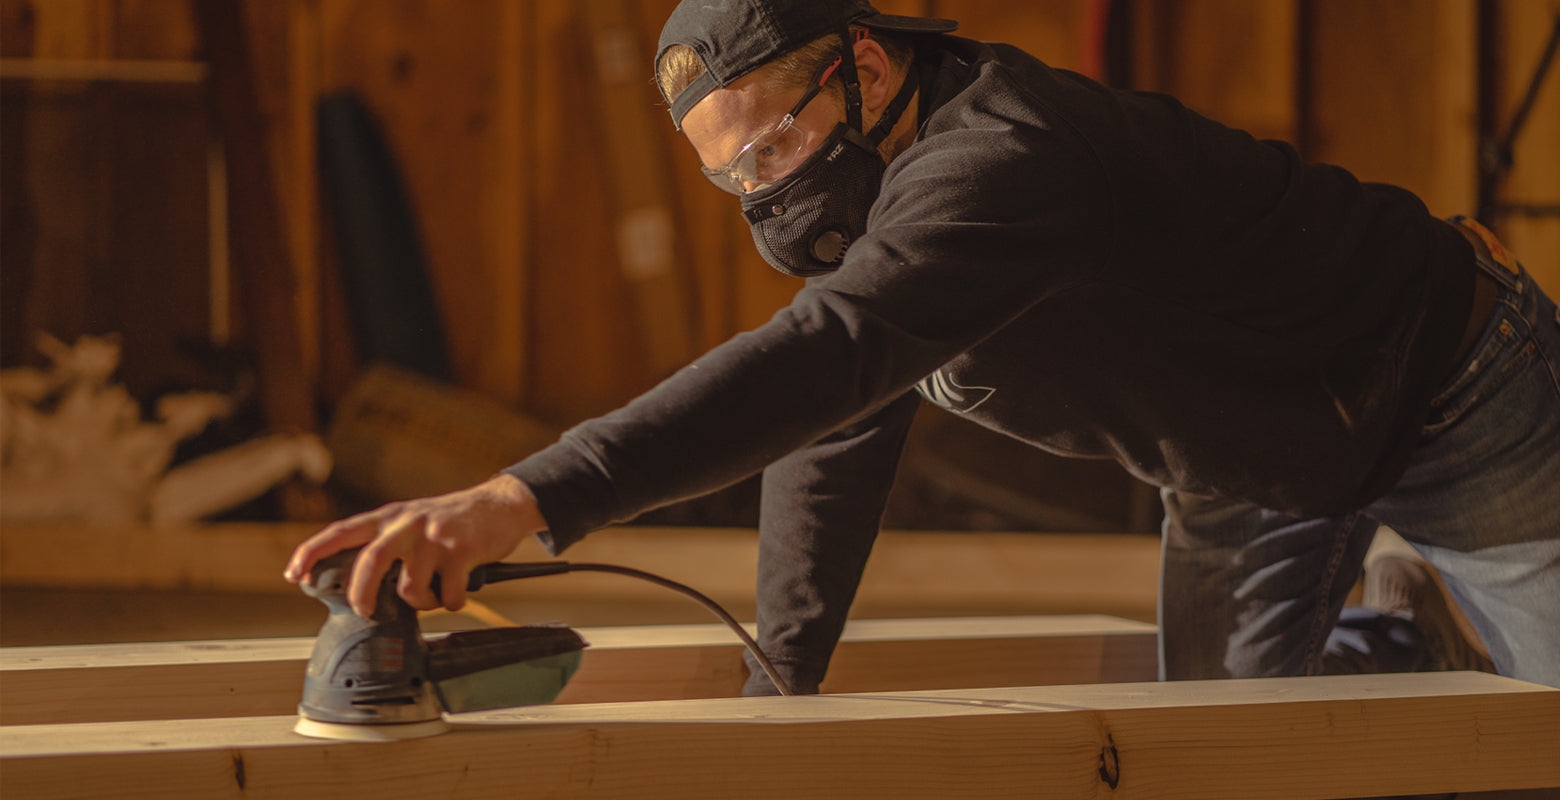 Man on a jobsite wearing an rz mask m2.5 mask while using a palm sander on a large beam. he is also wearing a hat, safety glasses and a sweatshirt